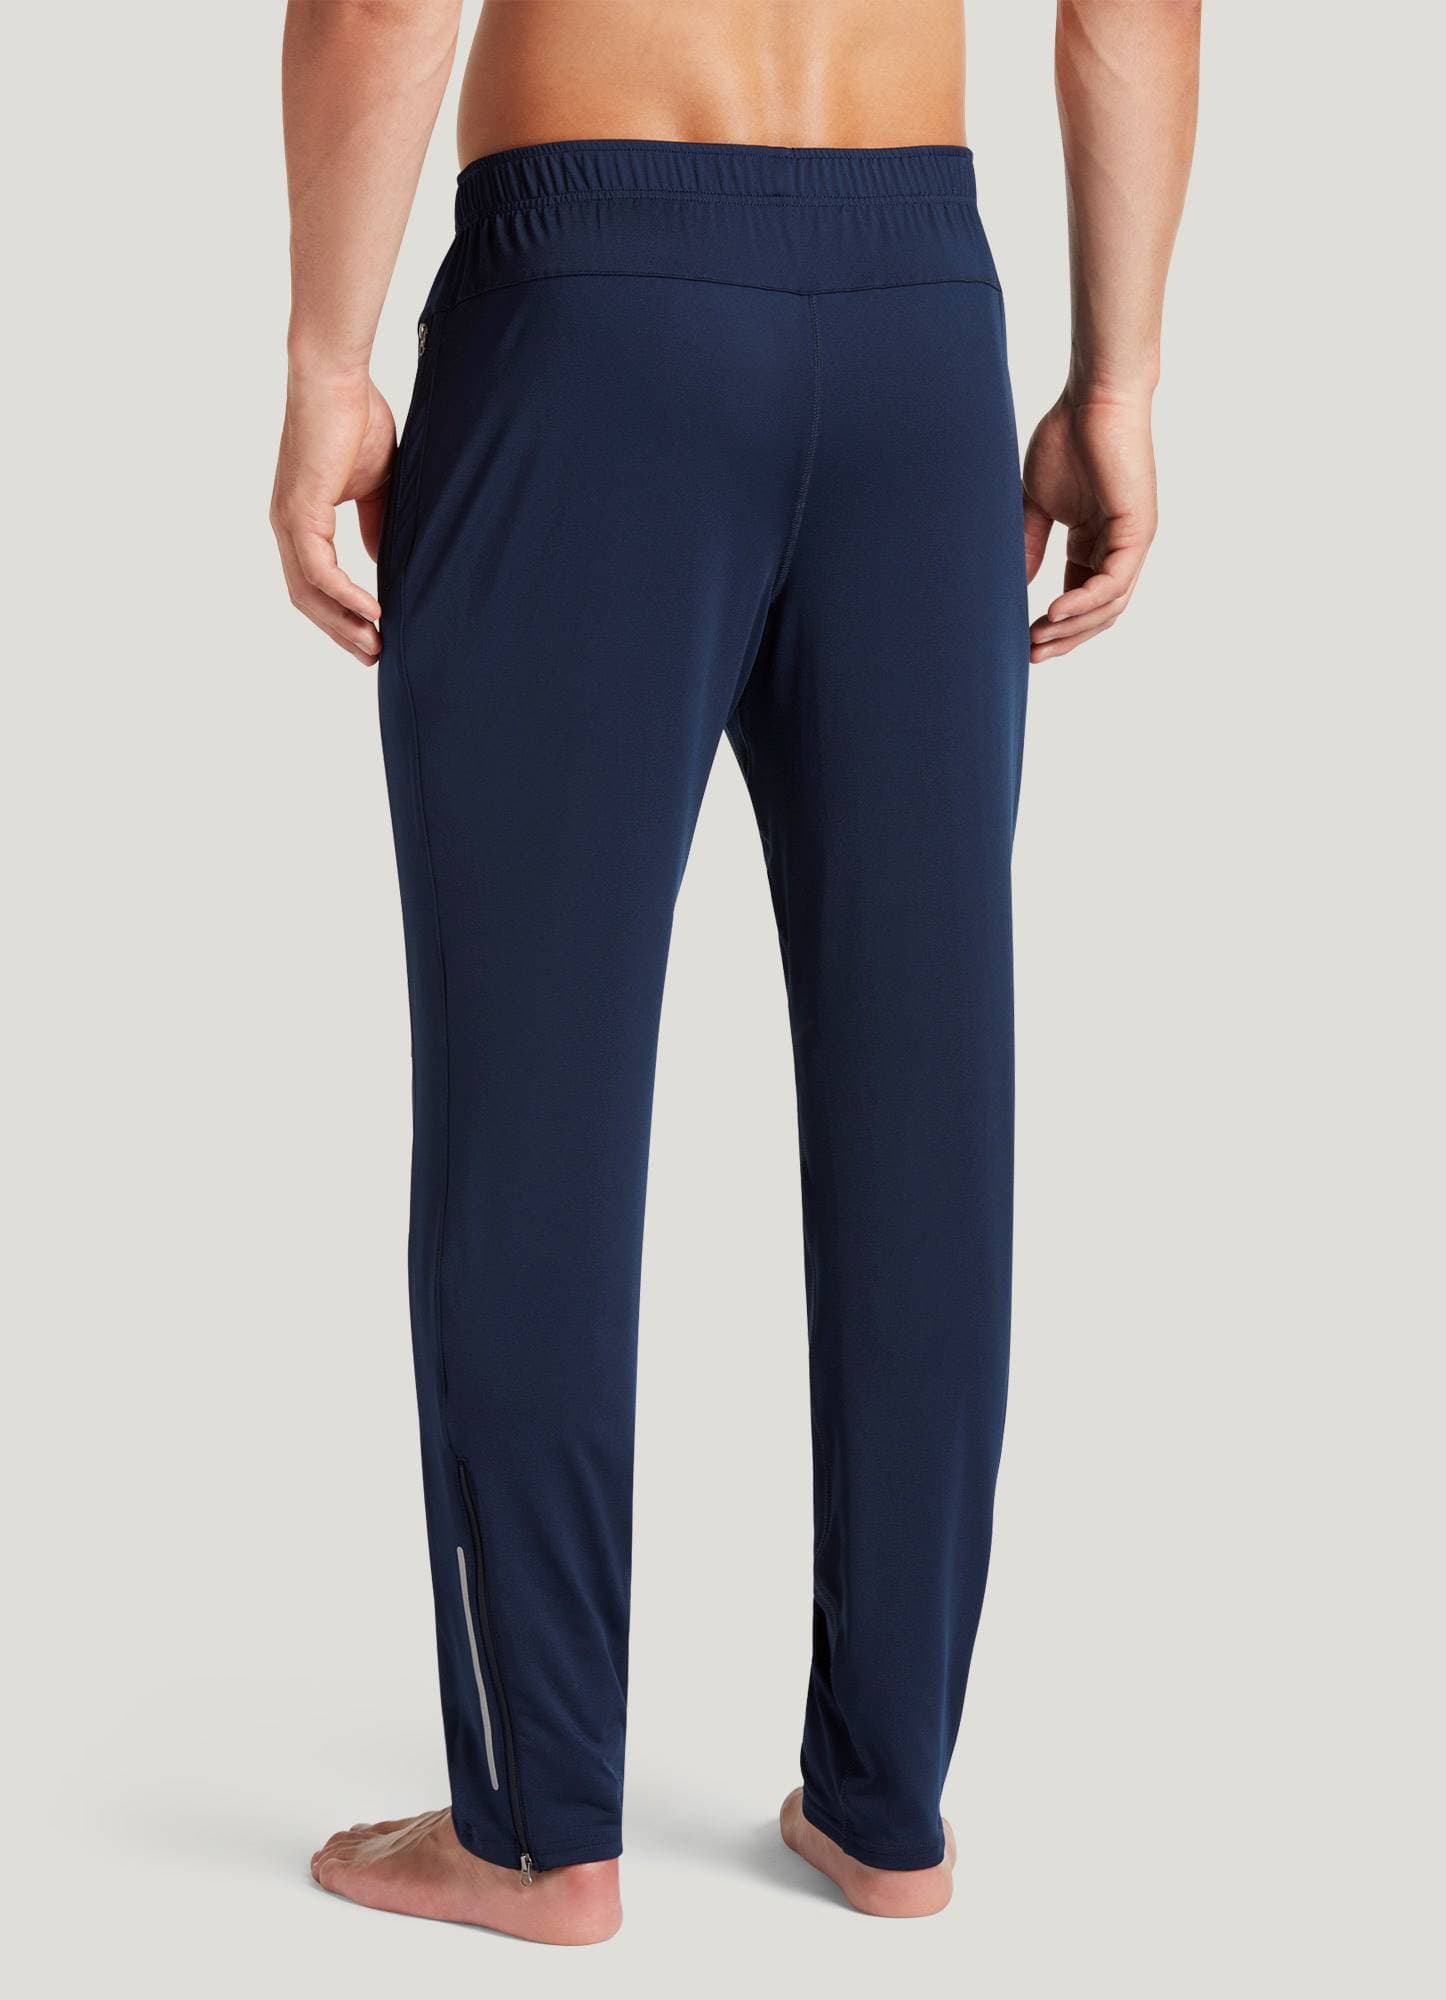 Buy Charcoal Track Pants for Men by JOCKEY Online